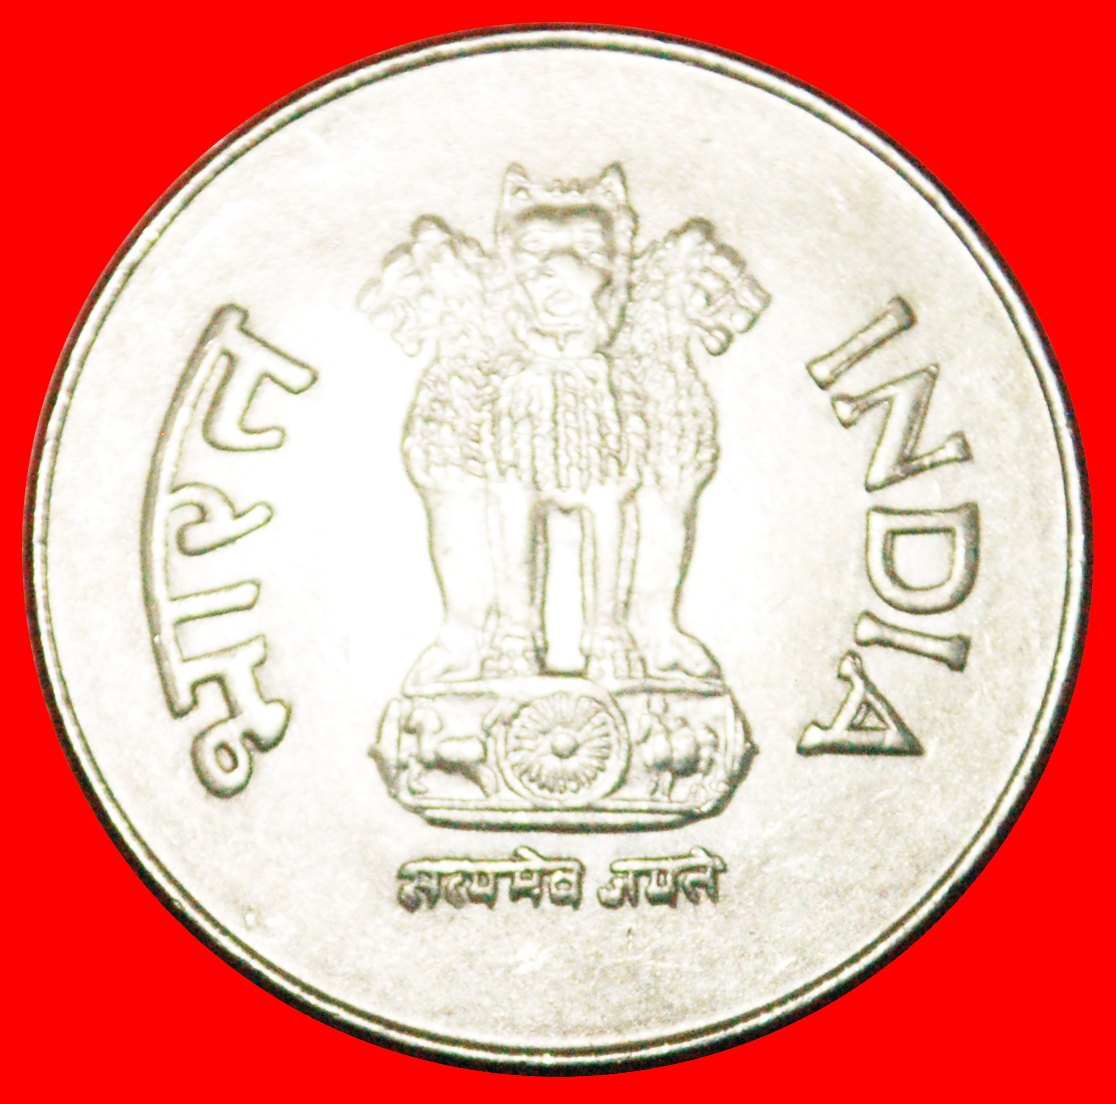  · LIONS: INDIA ★ 1 RUPEE 2001 SLOVAKIA MINT LUSTER! LOW START ★ NO RESERVE!   